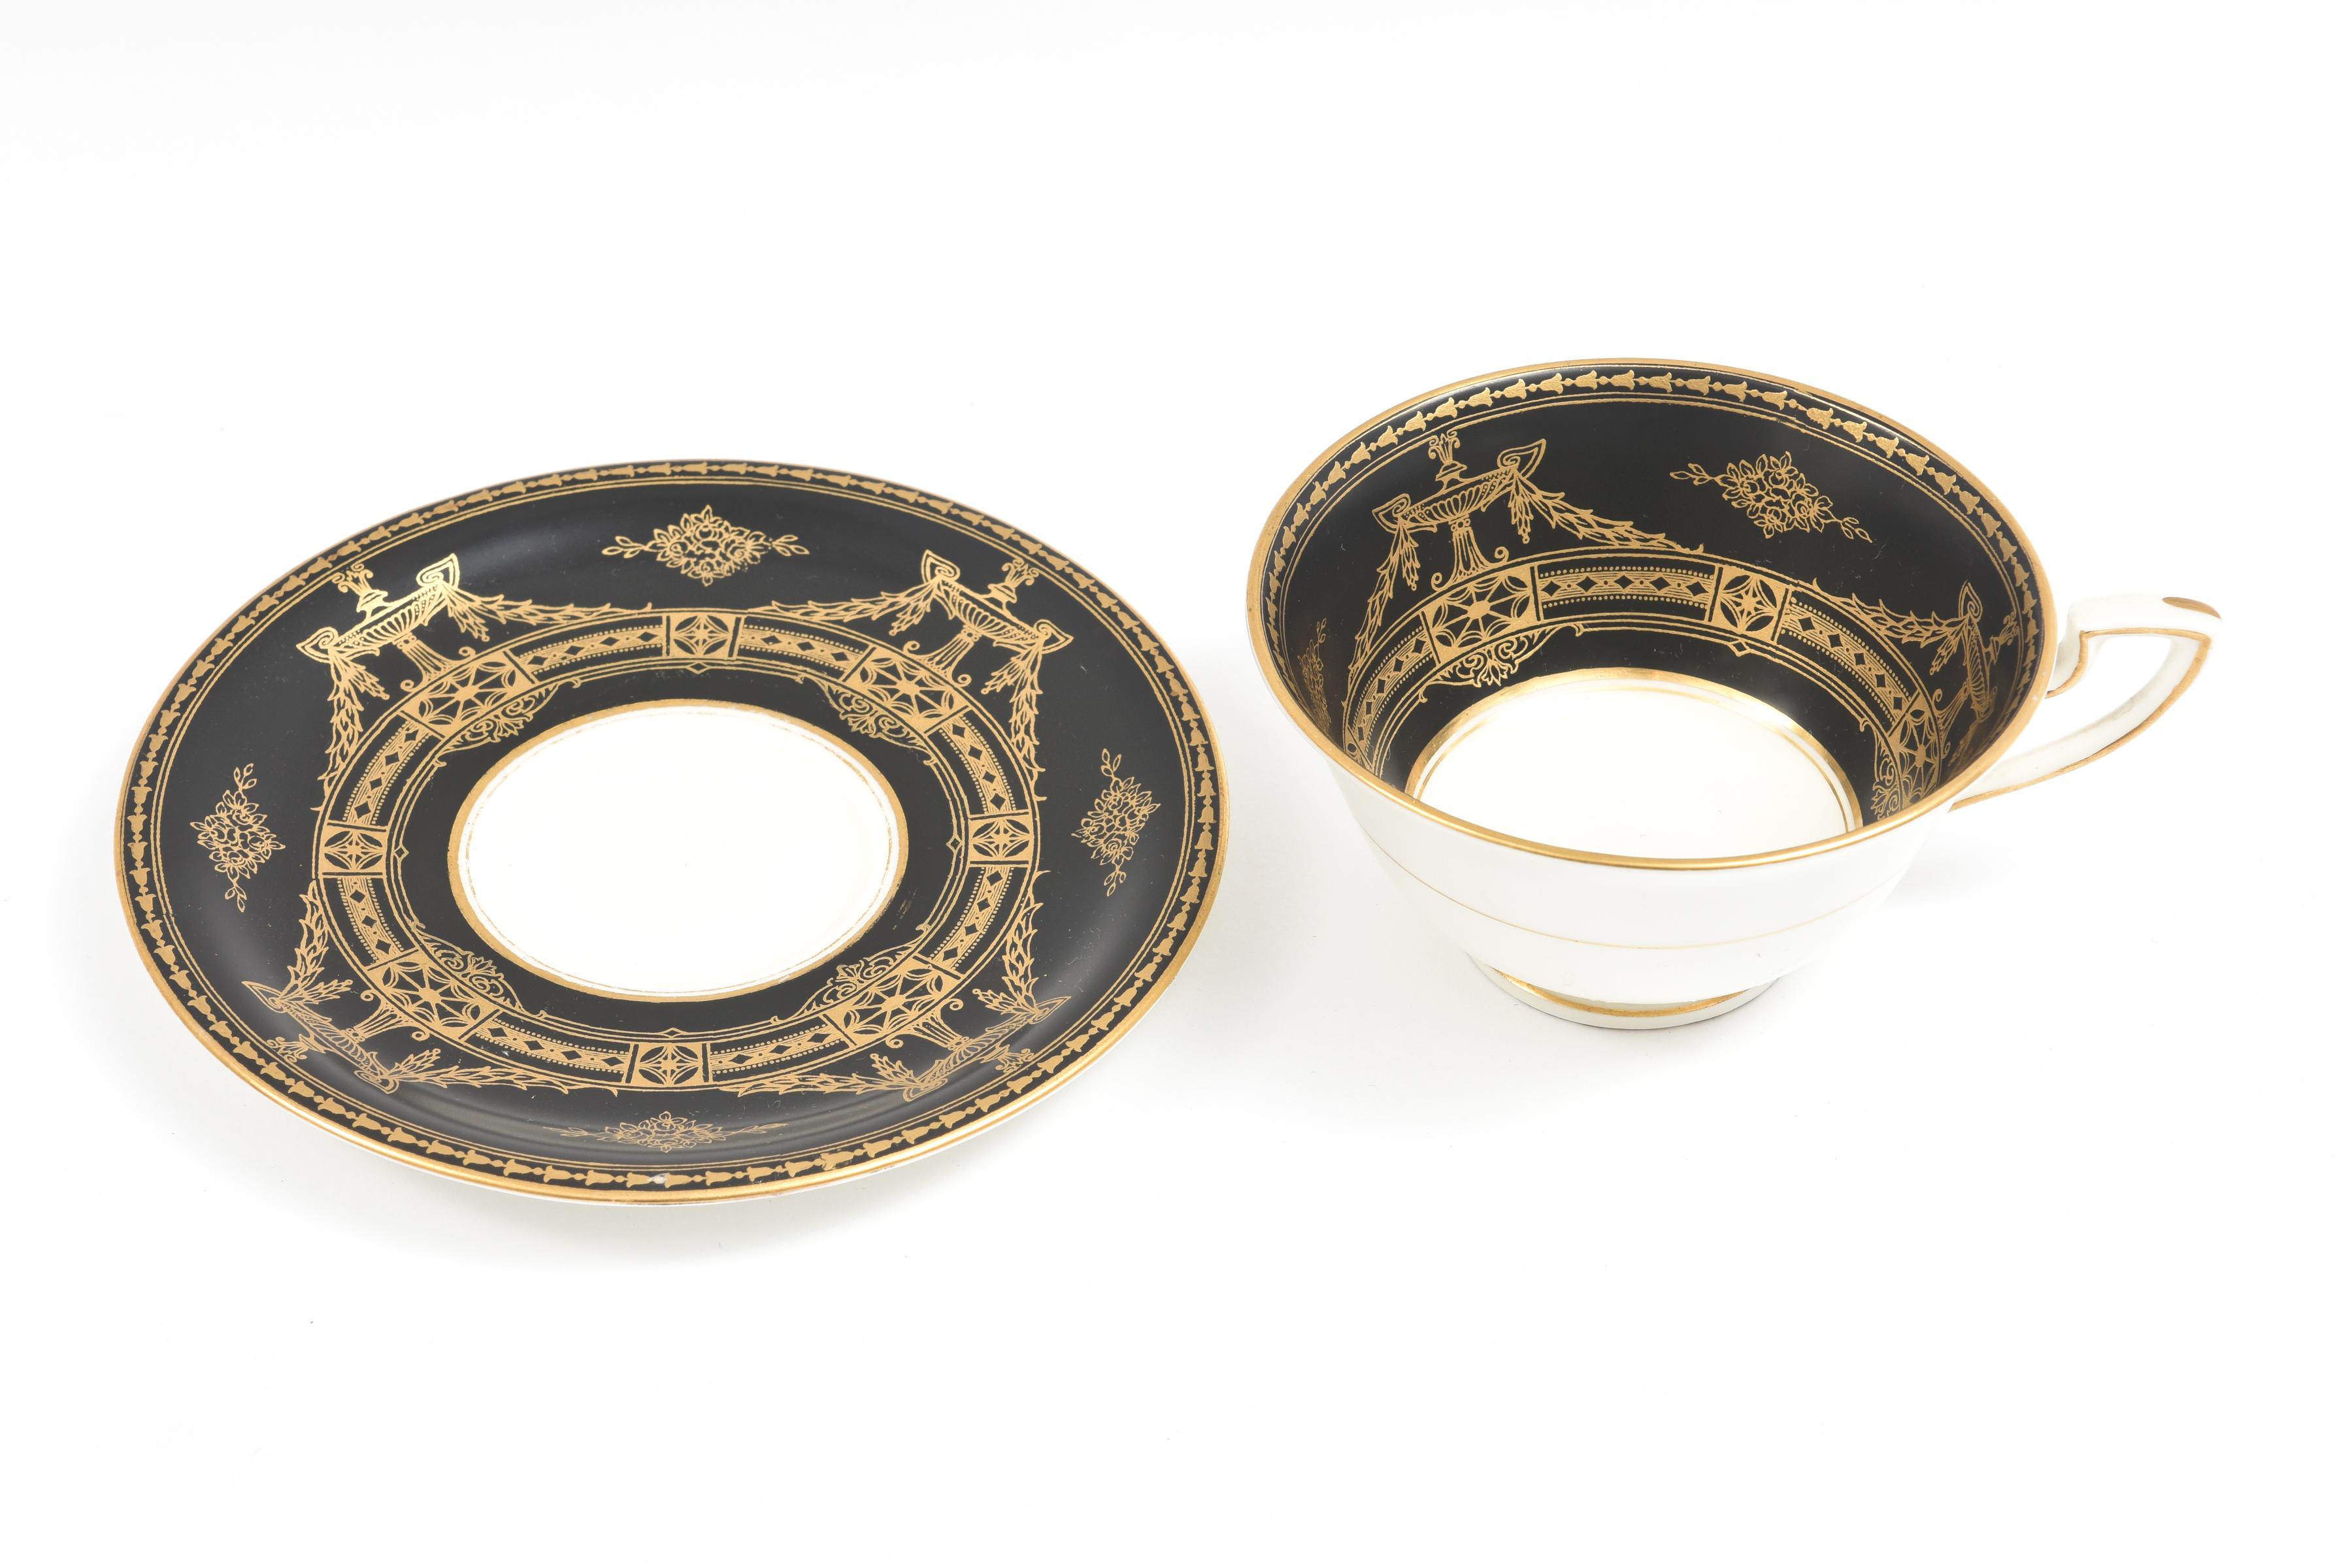 Early 20th Century Striking Black and Gold Dessert Service 34 Pcs. Antique Royal Worcester England